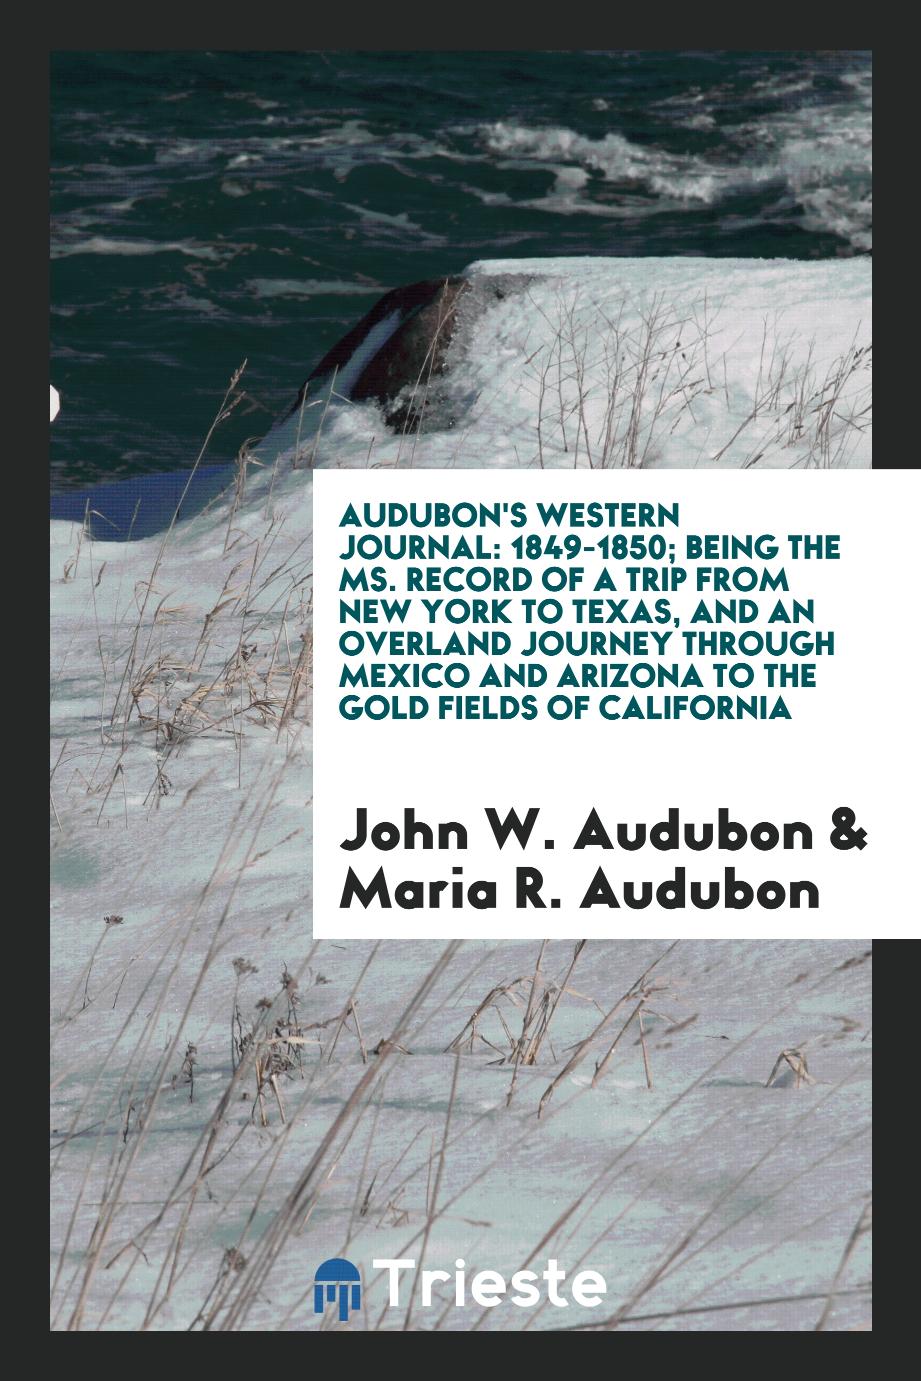 Audubon's Western journal: 1849-1850; being the ms. record of a trip from New York to Texas, and an overland journey through Mexico and Arizona to the gold fields of California